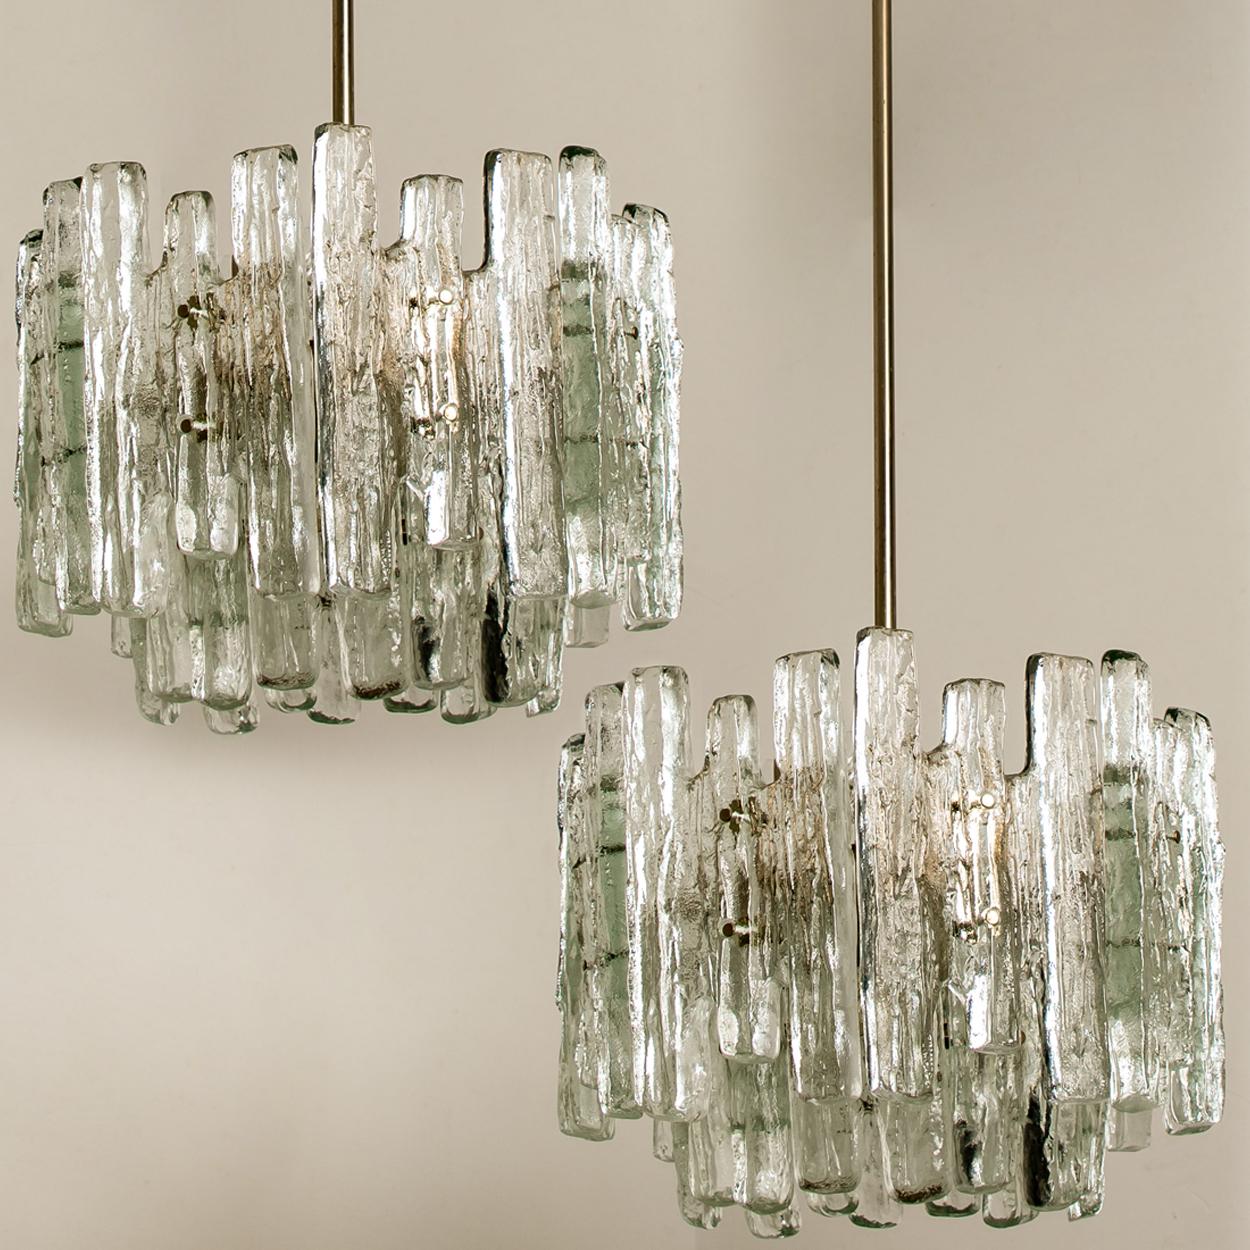 Steel Pair of Large Modern Three-Tiered Chrome Ice Glass Chandeliers by J.T. Kalmar For Sale